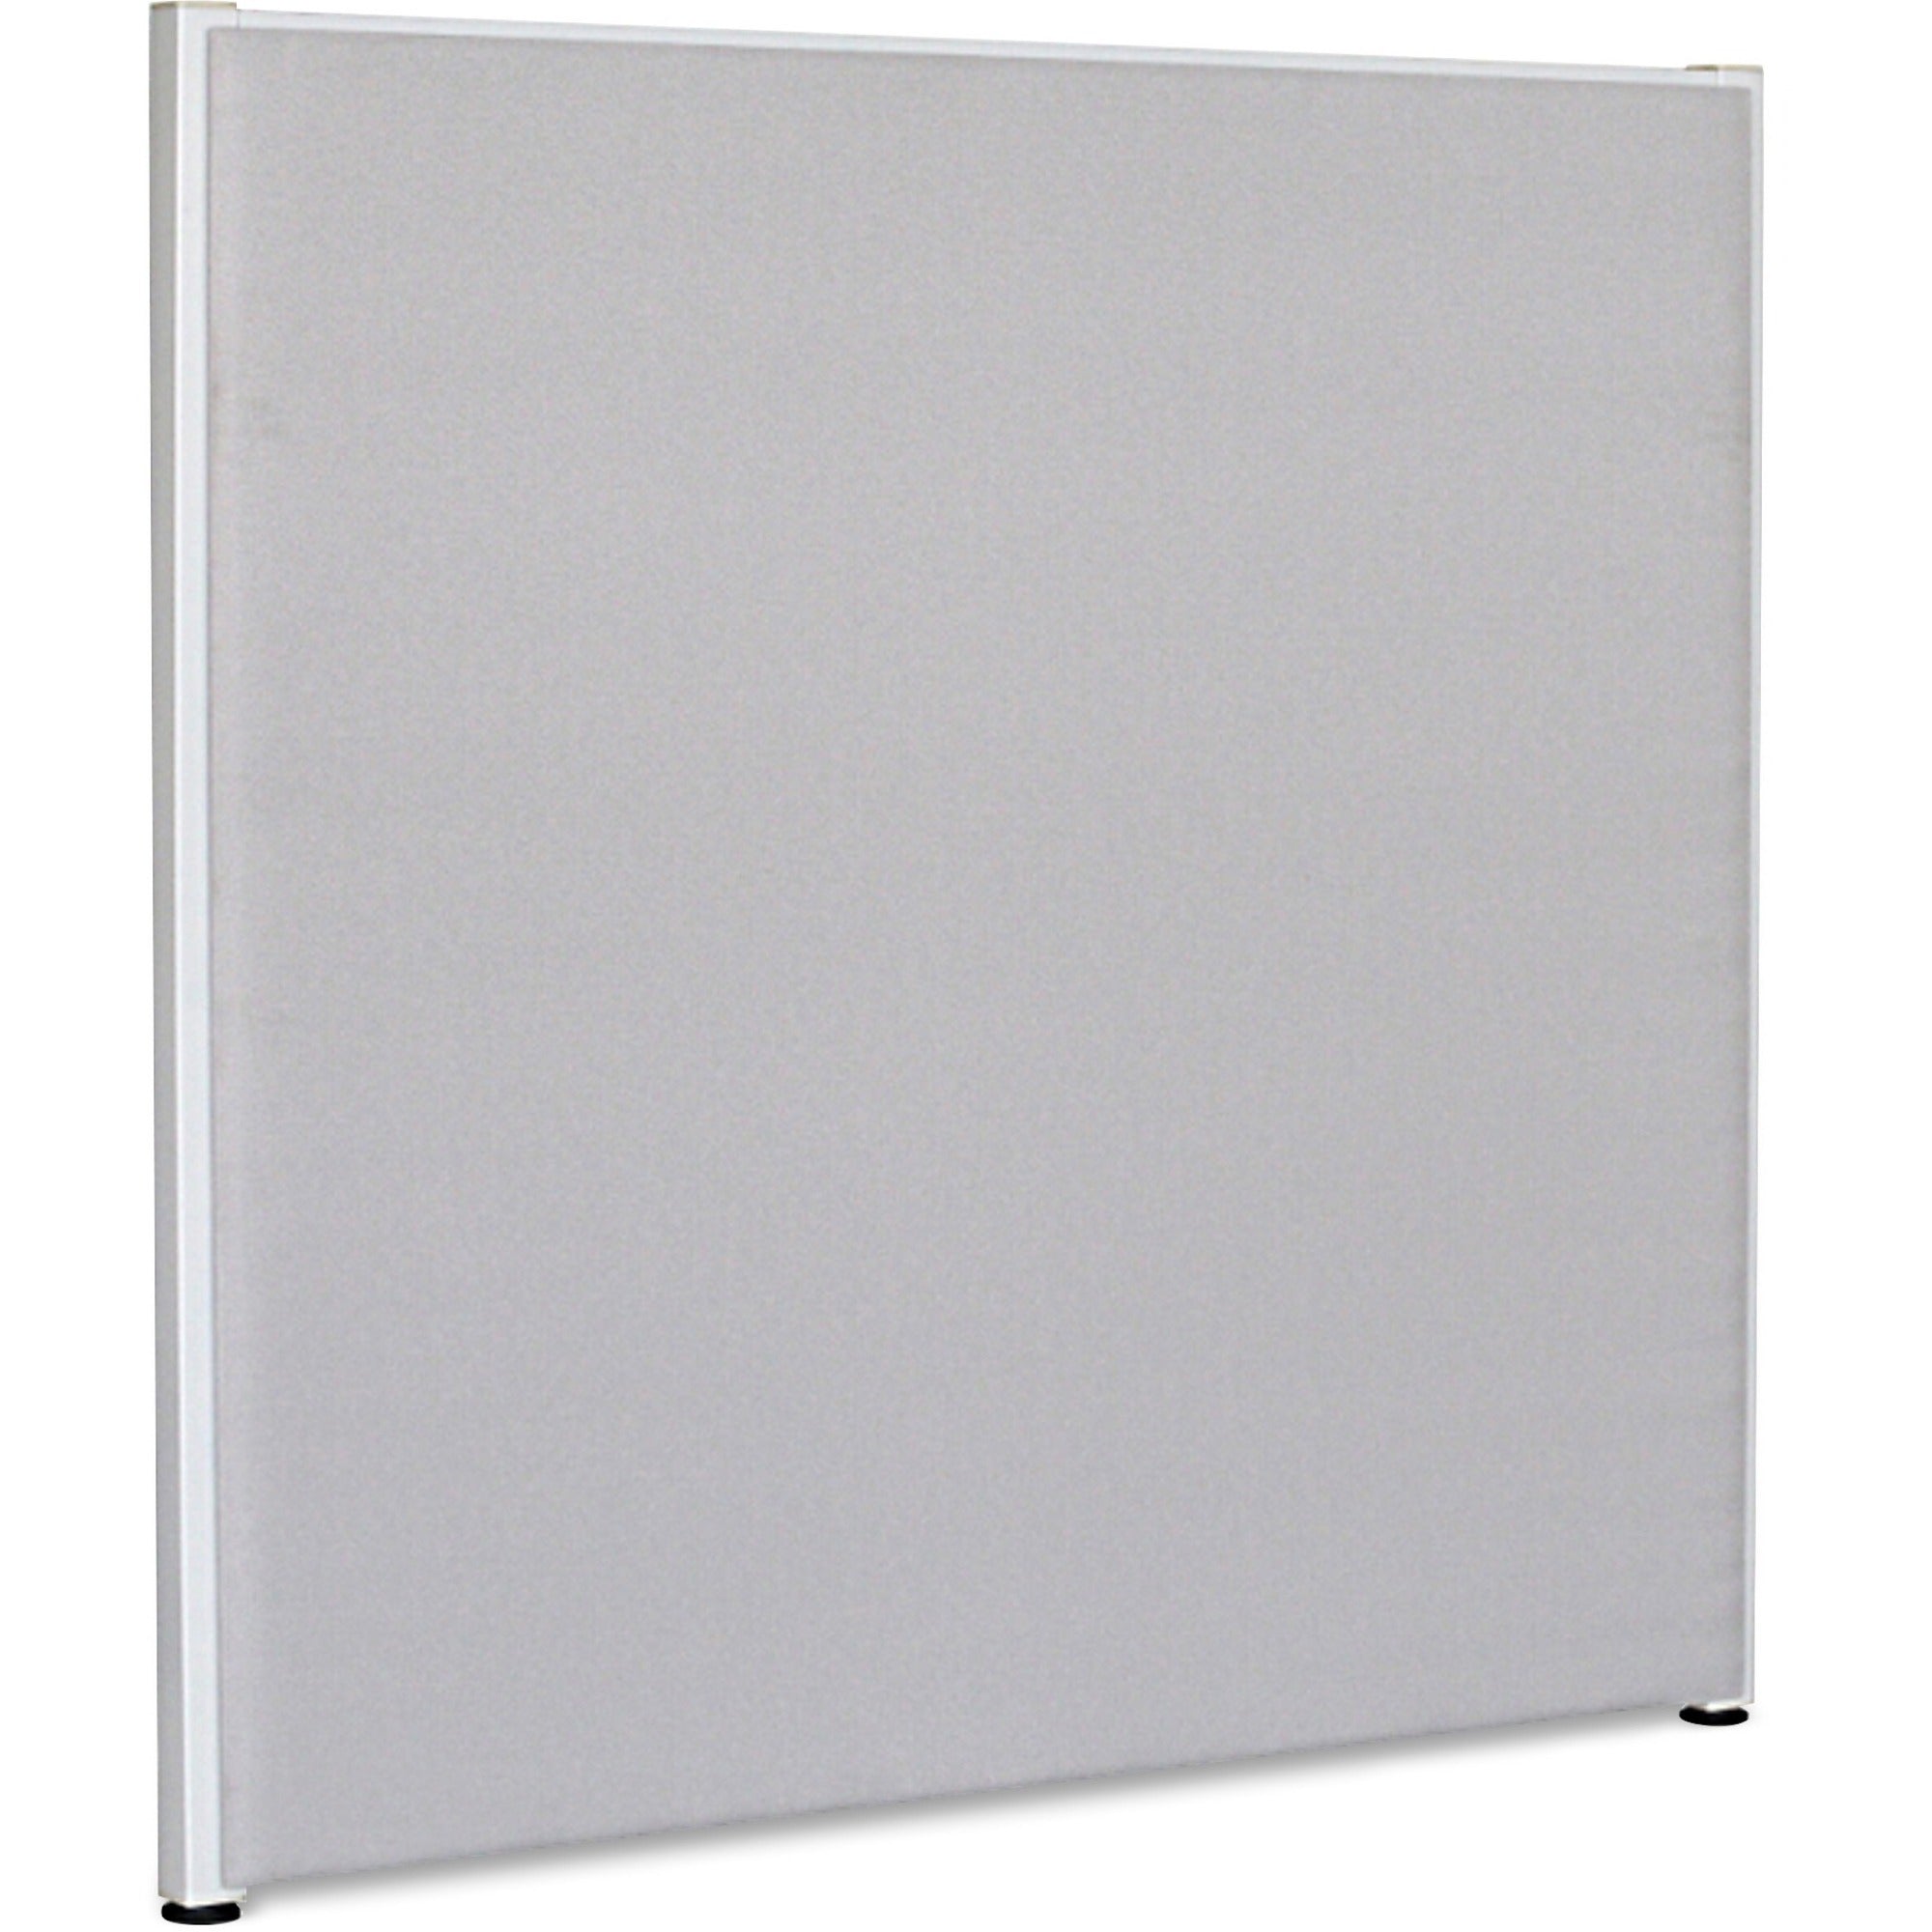 lorell-panel-system-partition-fabric-panel-48-width-x-48-height-fabric-steel-gray-1-each_llr90266 - 1